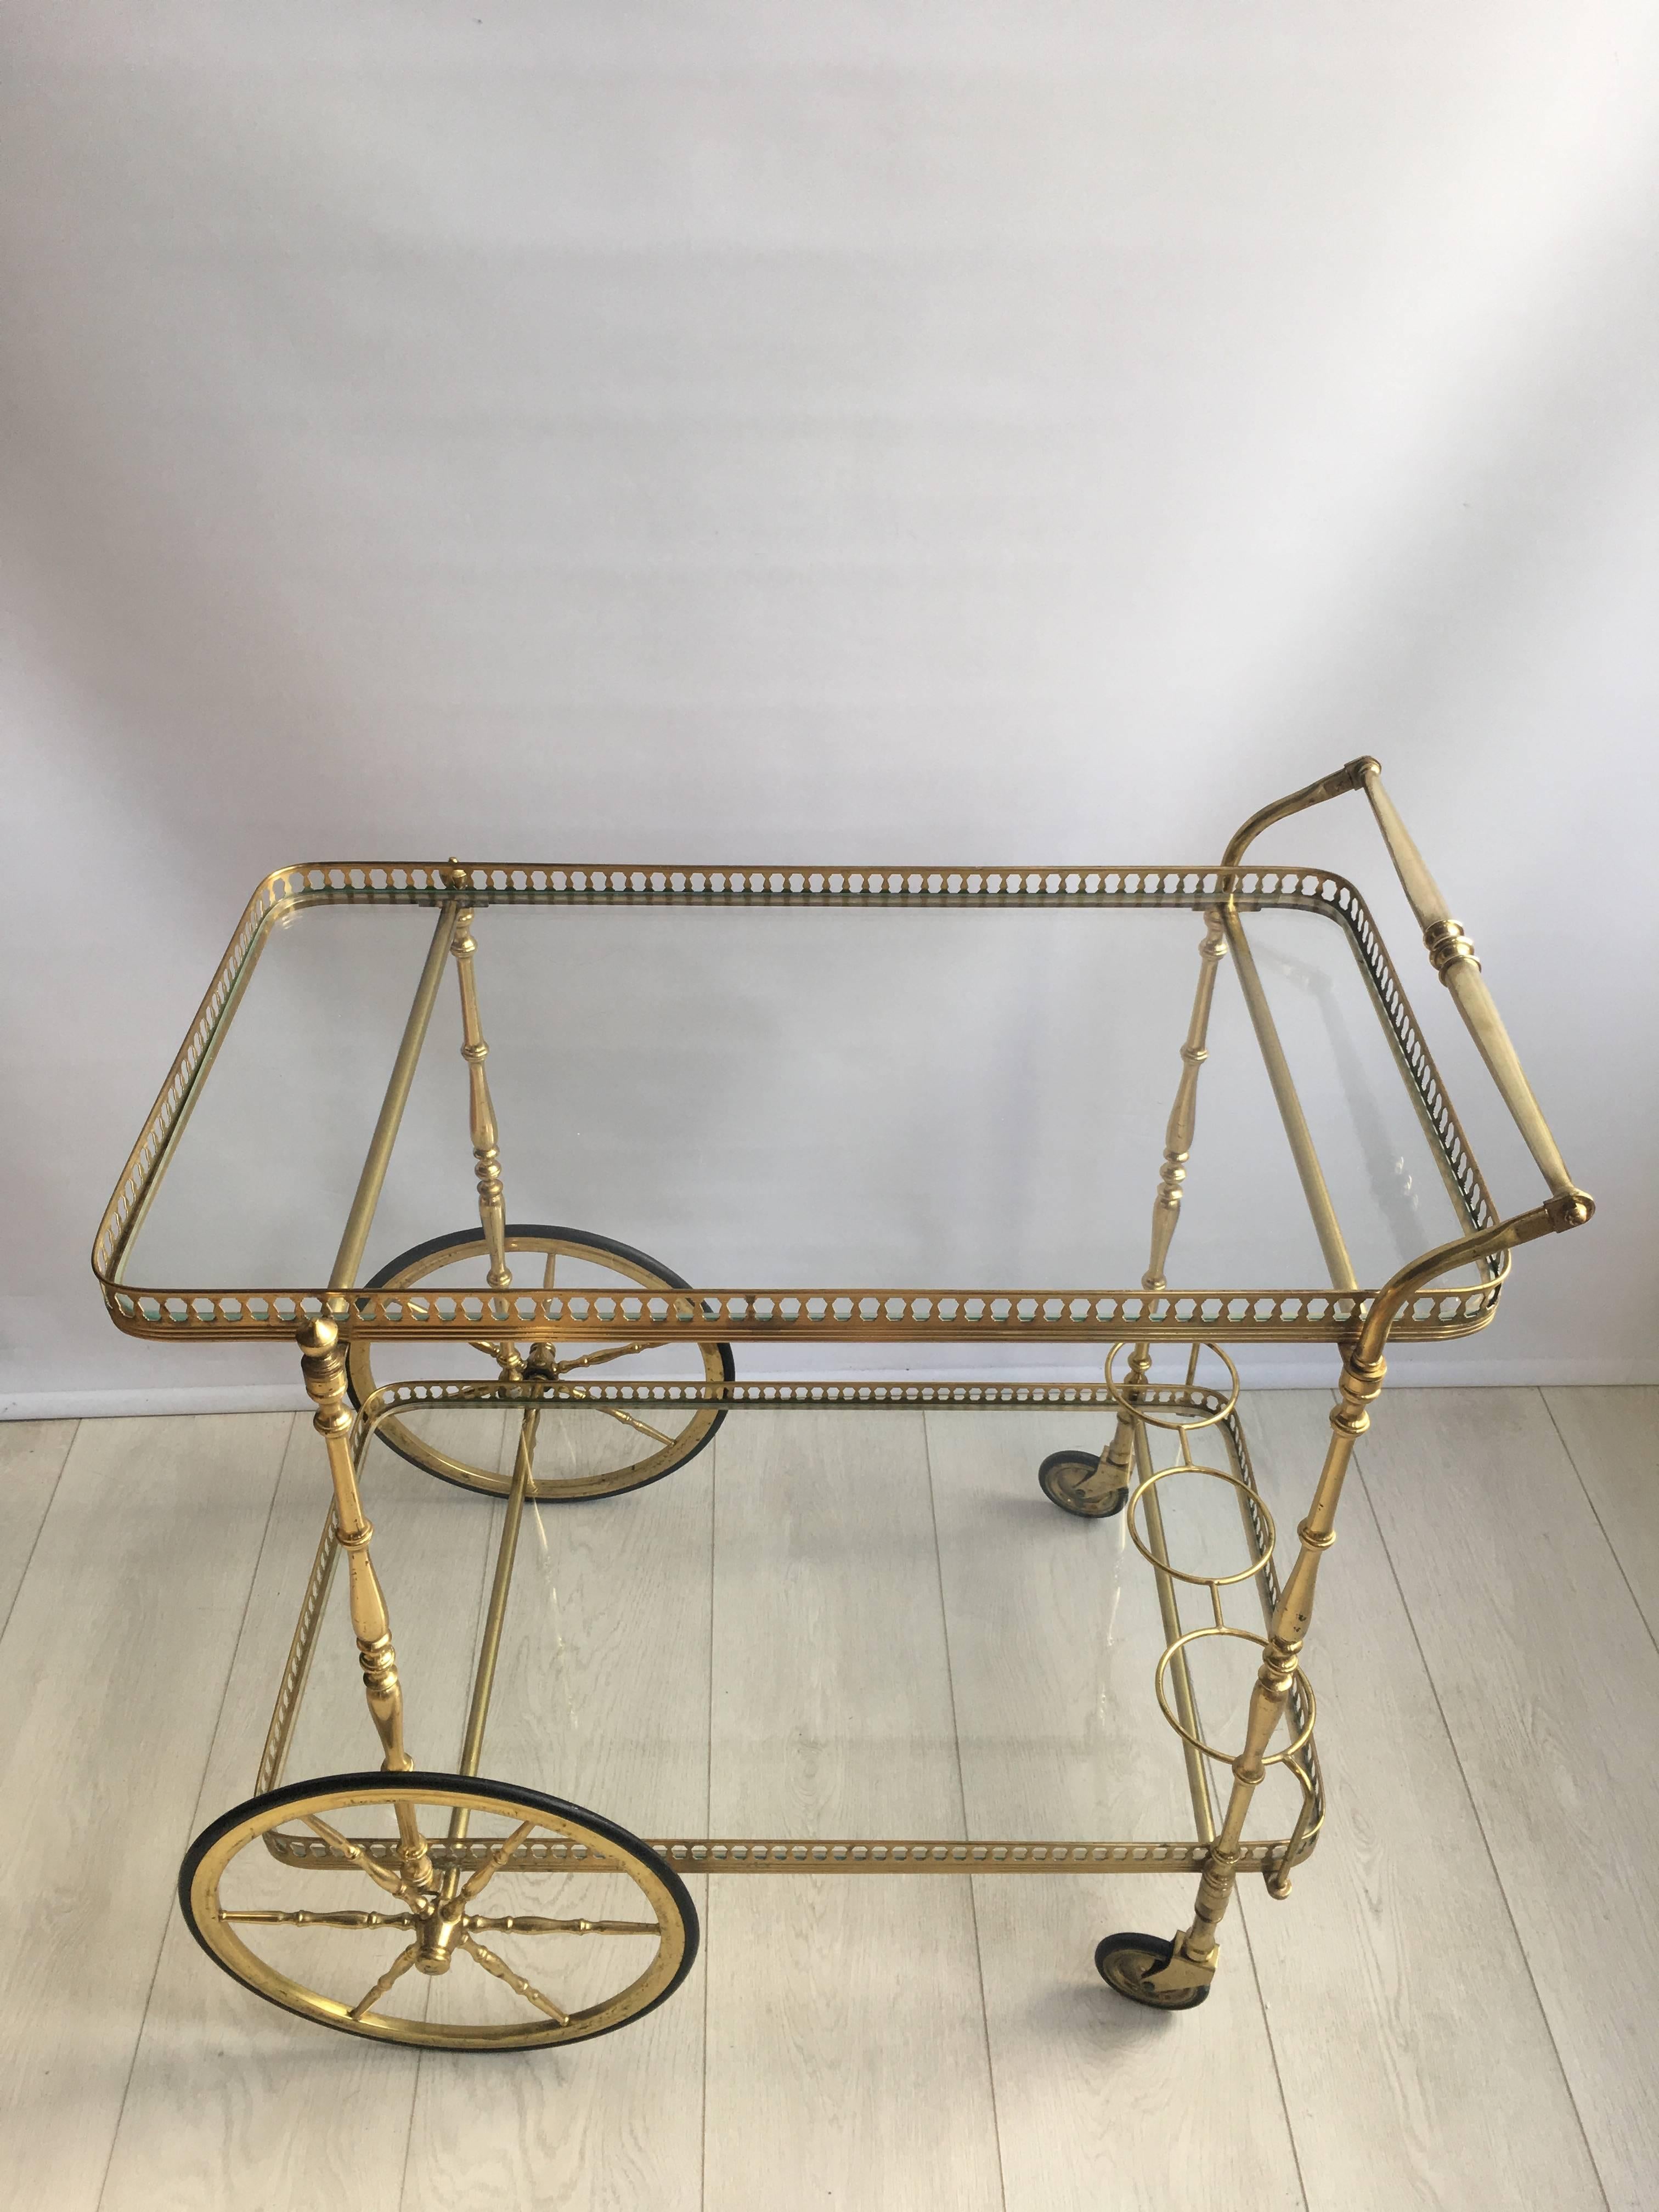 Mid-20th Century Vintage French Brass Drinks Trolley or Bar Cart